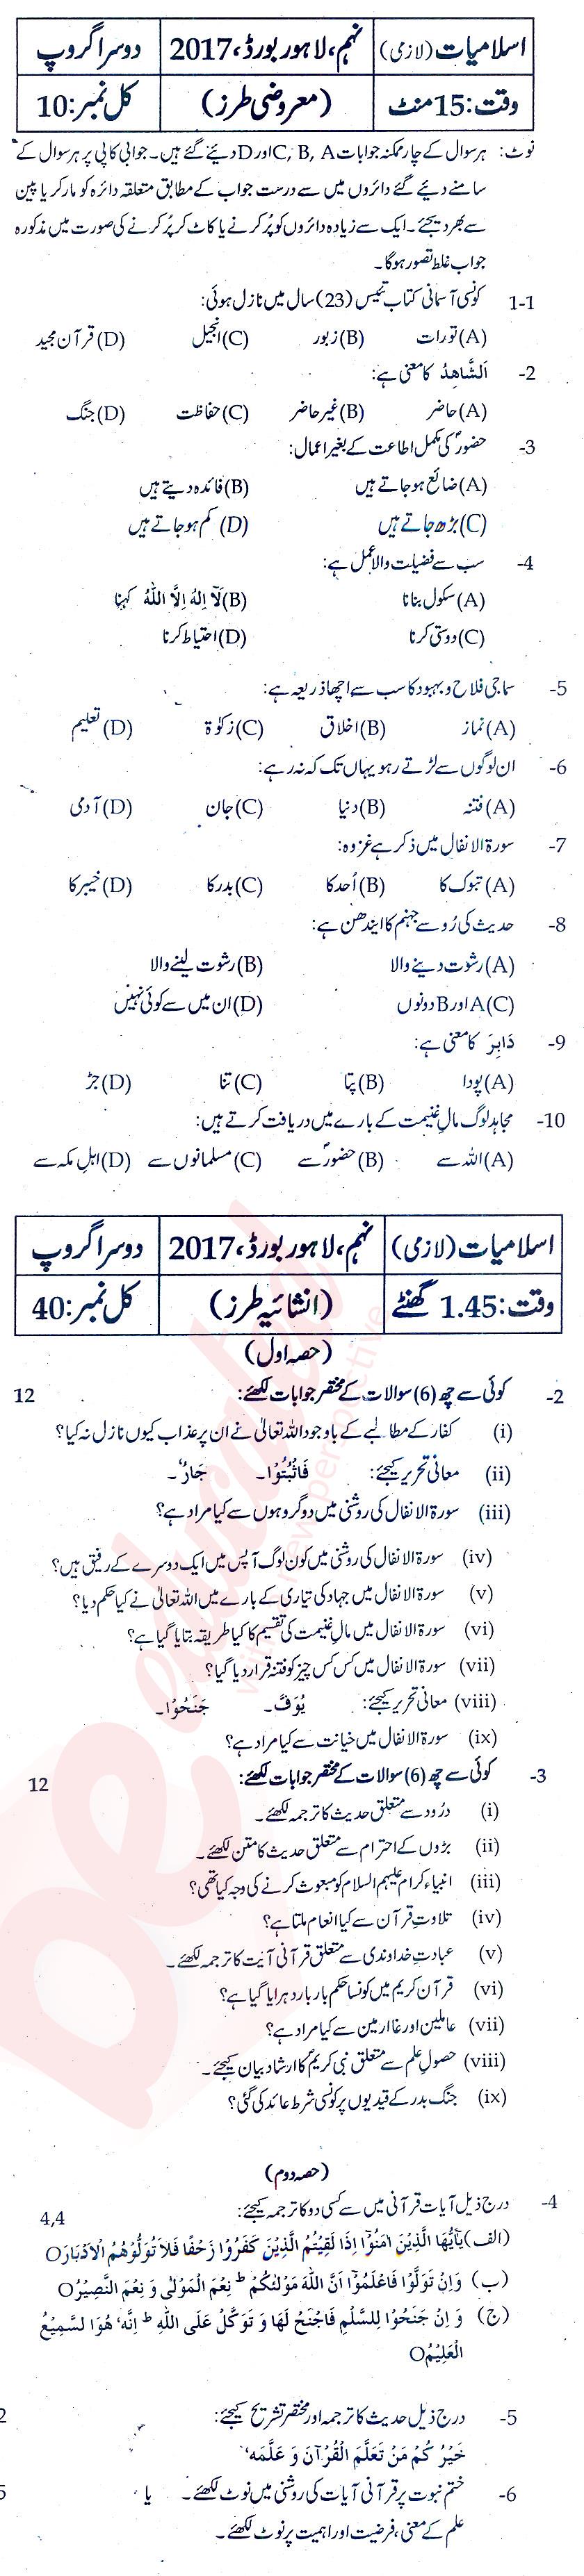 Islamiat (Compulsory) 9th class Past Paper Group 2 BISE Lahore 2017